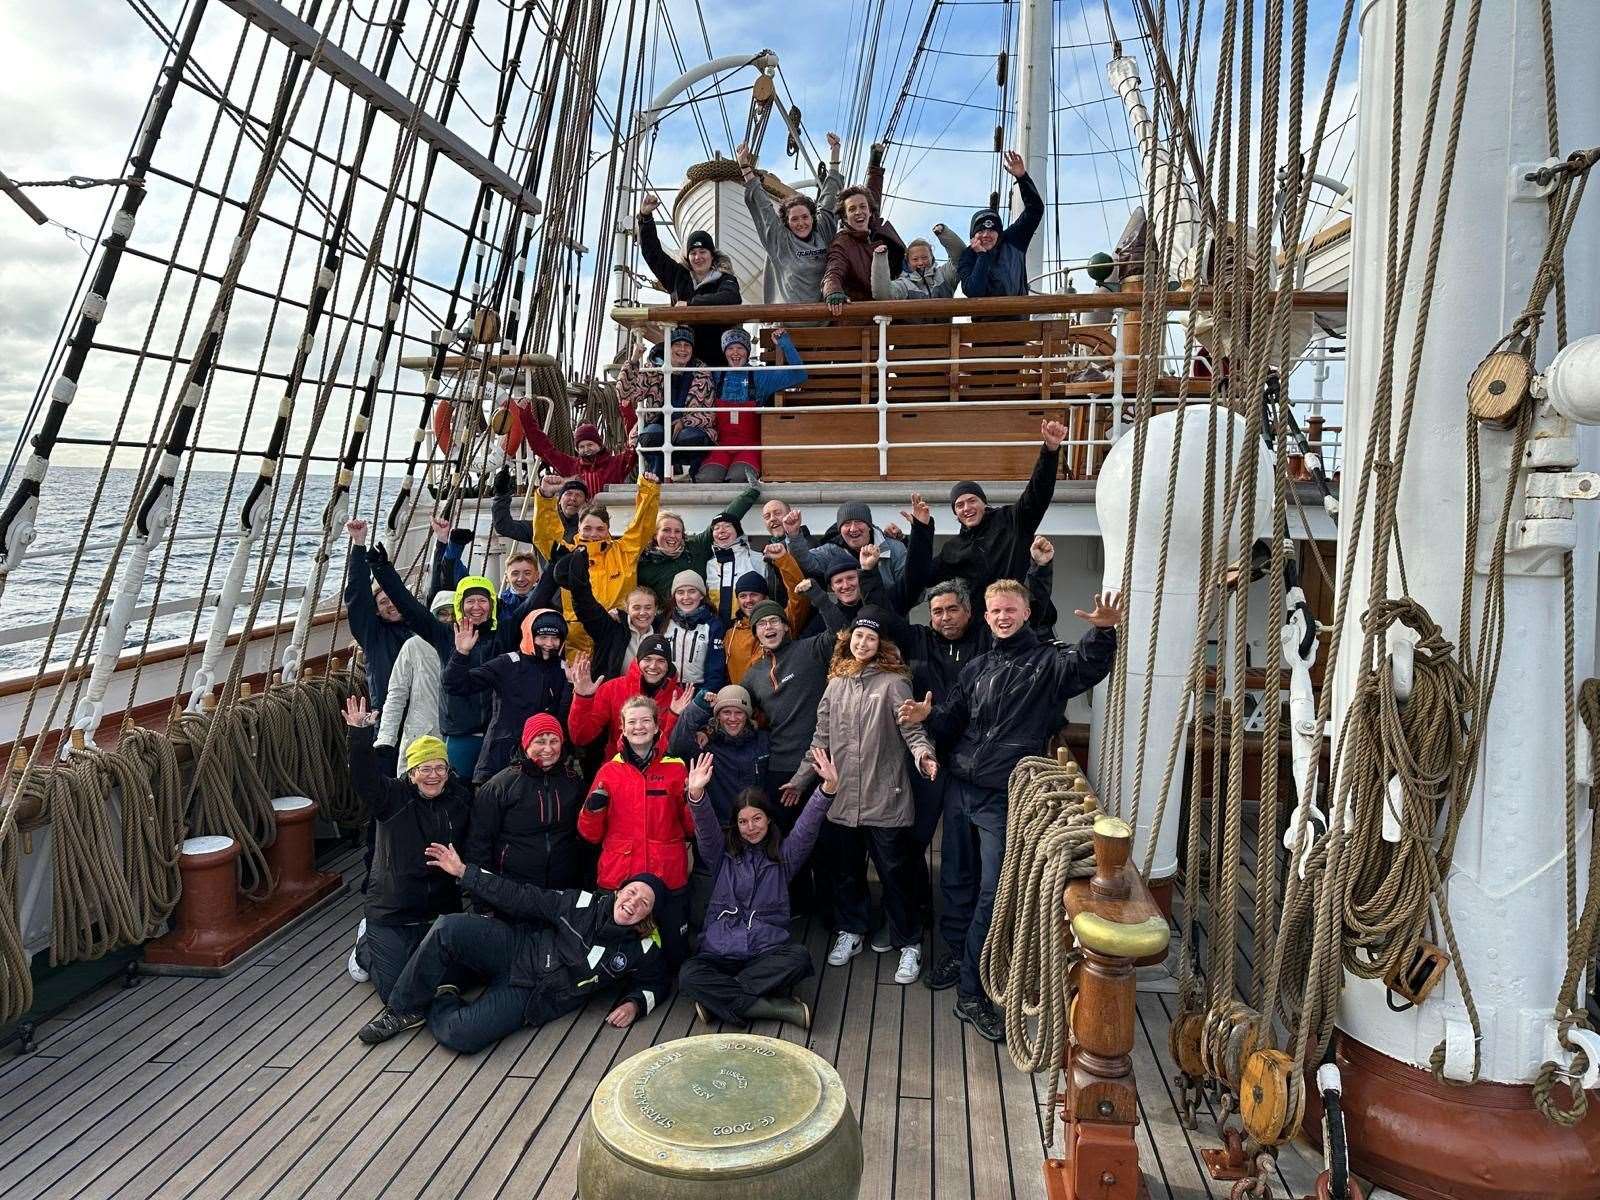 The group of voluntary sail trainees aboard the Statsraad Lehmkuhl. Molly is top right.